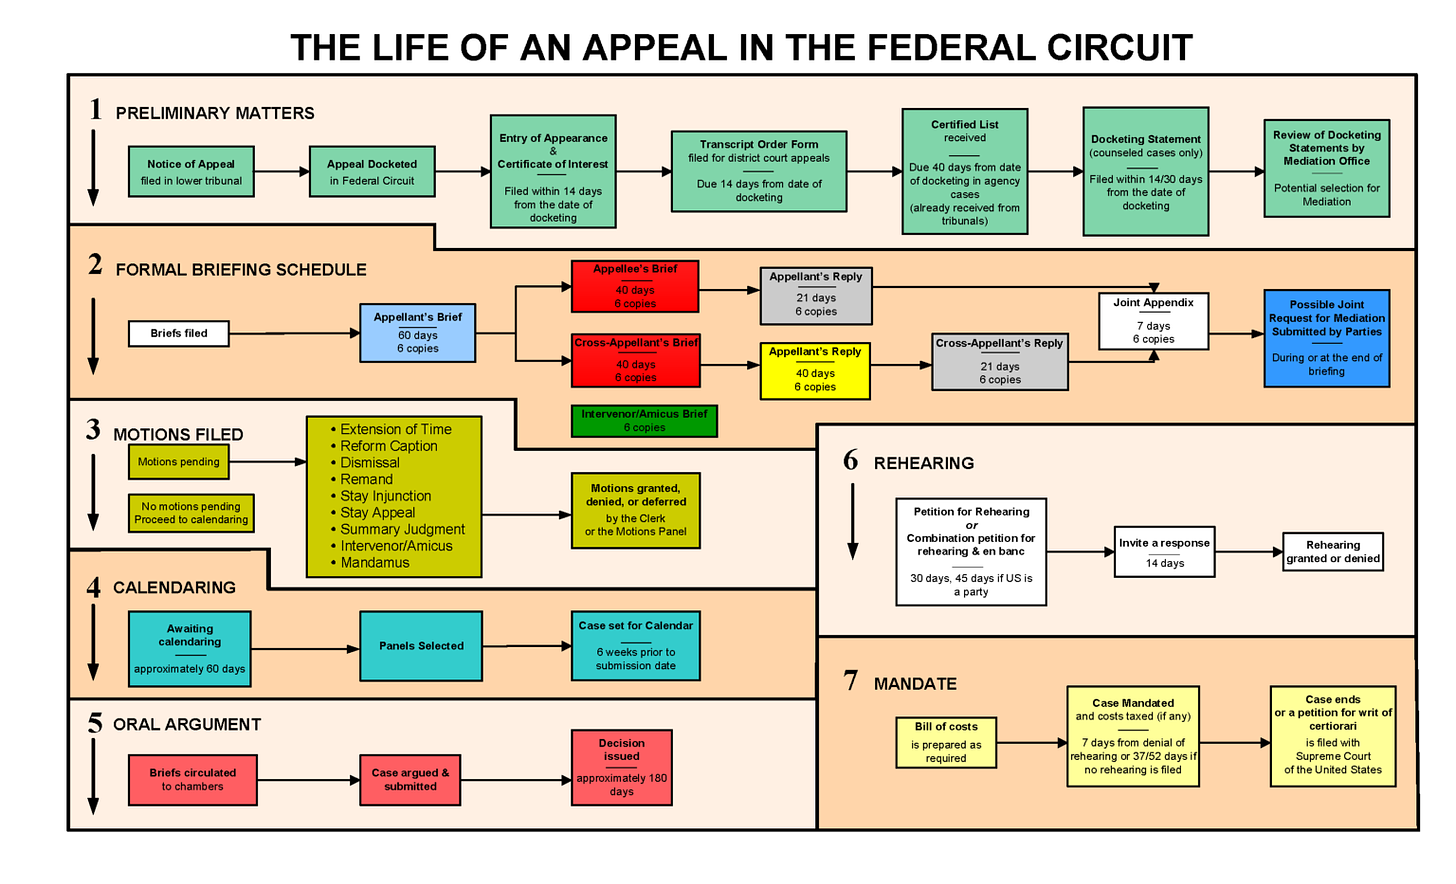 the life of an appeal (pdf) in the United States Court of Appeals for the Federal Circuit consists of seven general steps.